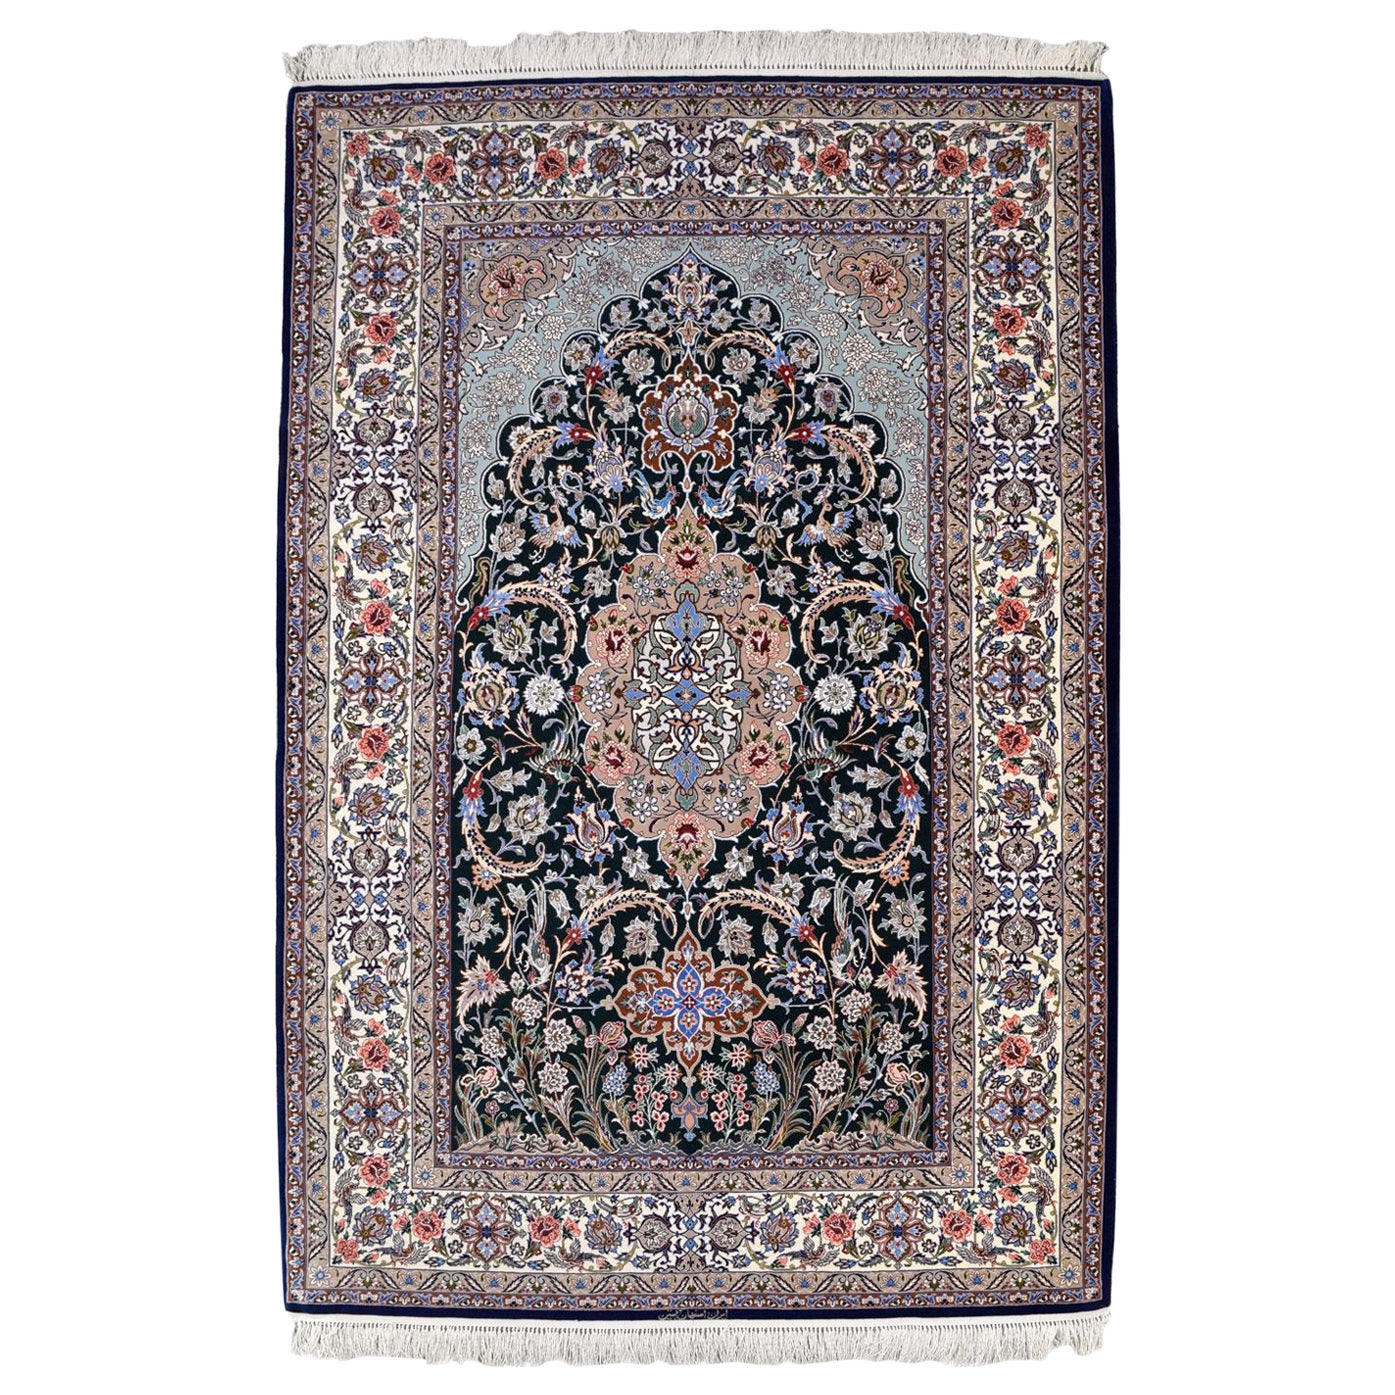 Isfahan Persian Carpet, Wool and Silk in Blue, Cream and Red, 5' x 7' For Sale